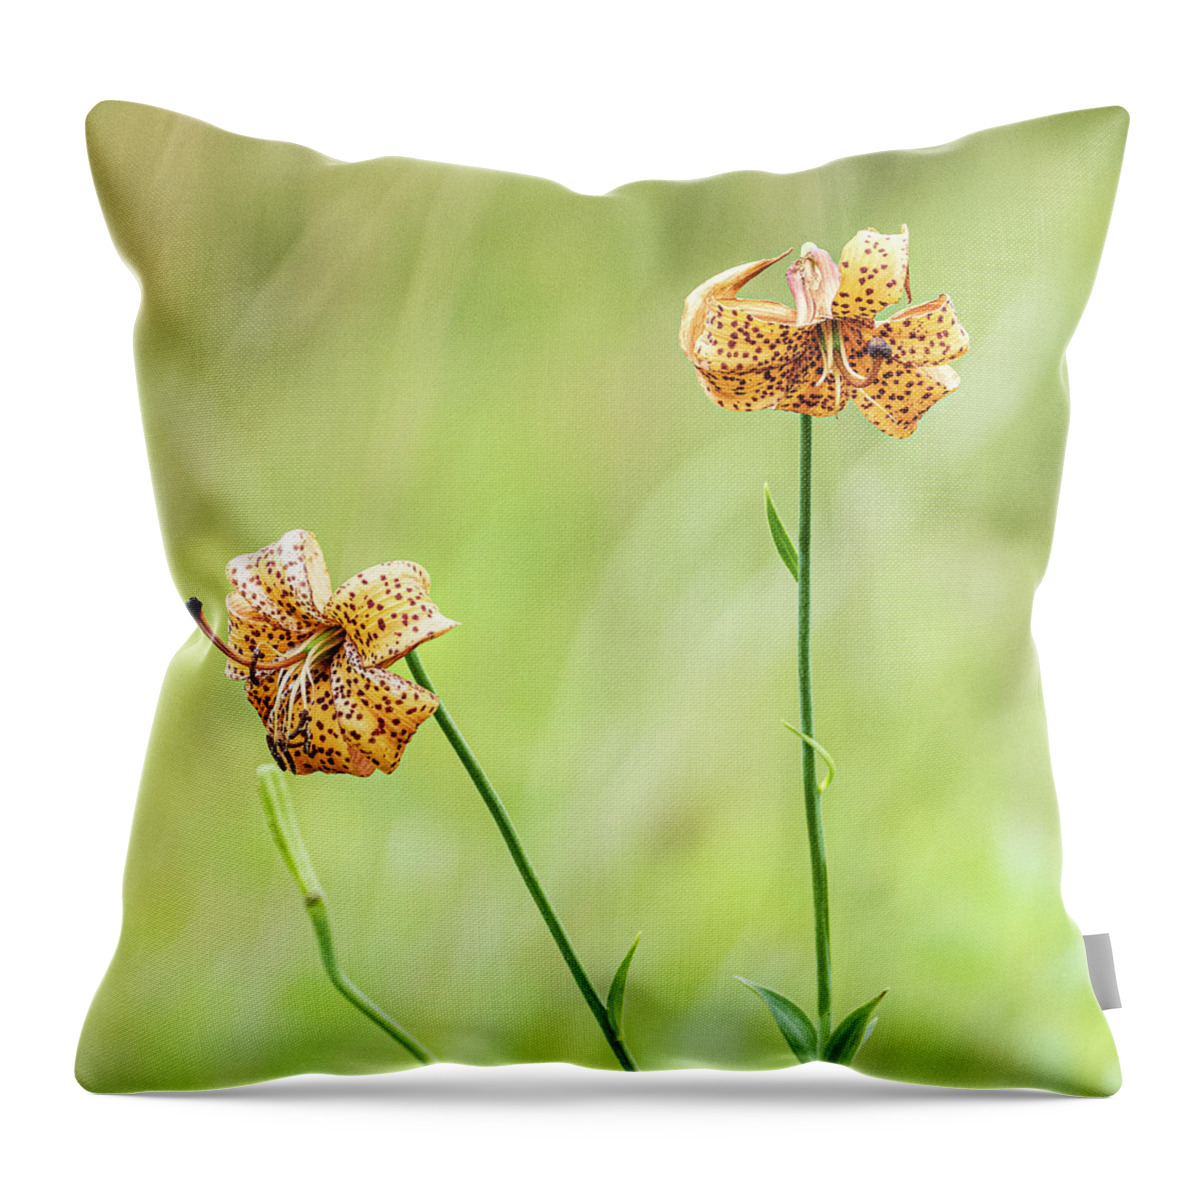 Red Yellow Flowers Shallow Depth Of Field Throw Pillow featuring the photograph Red And Yellow Flowers by David Morehead